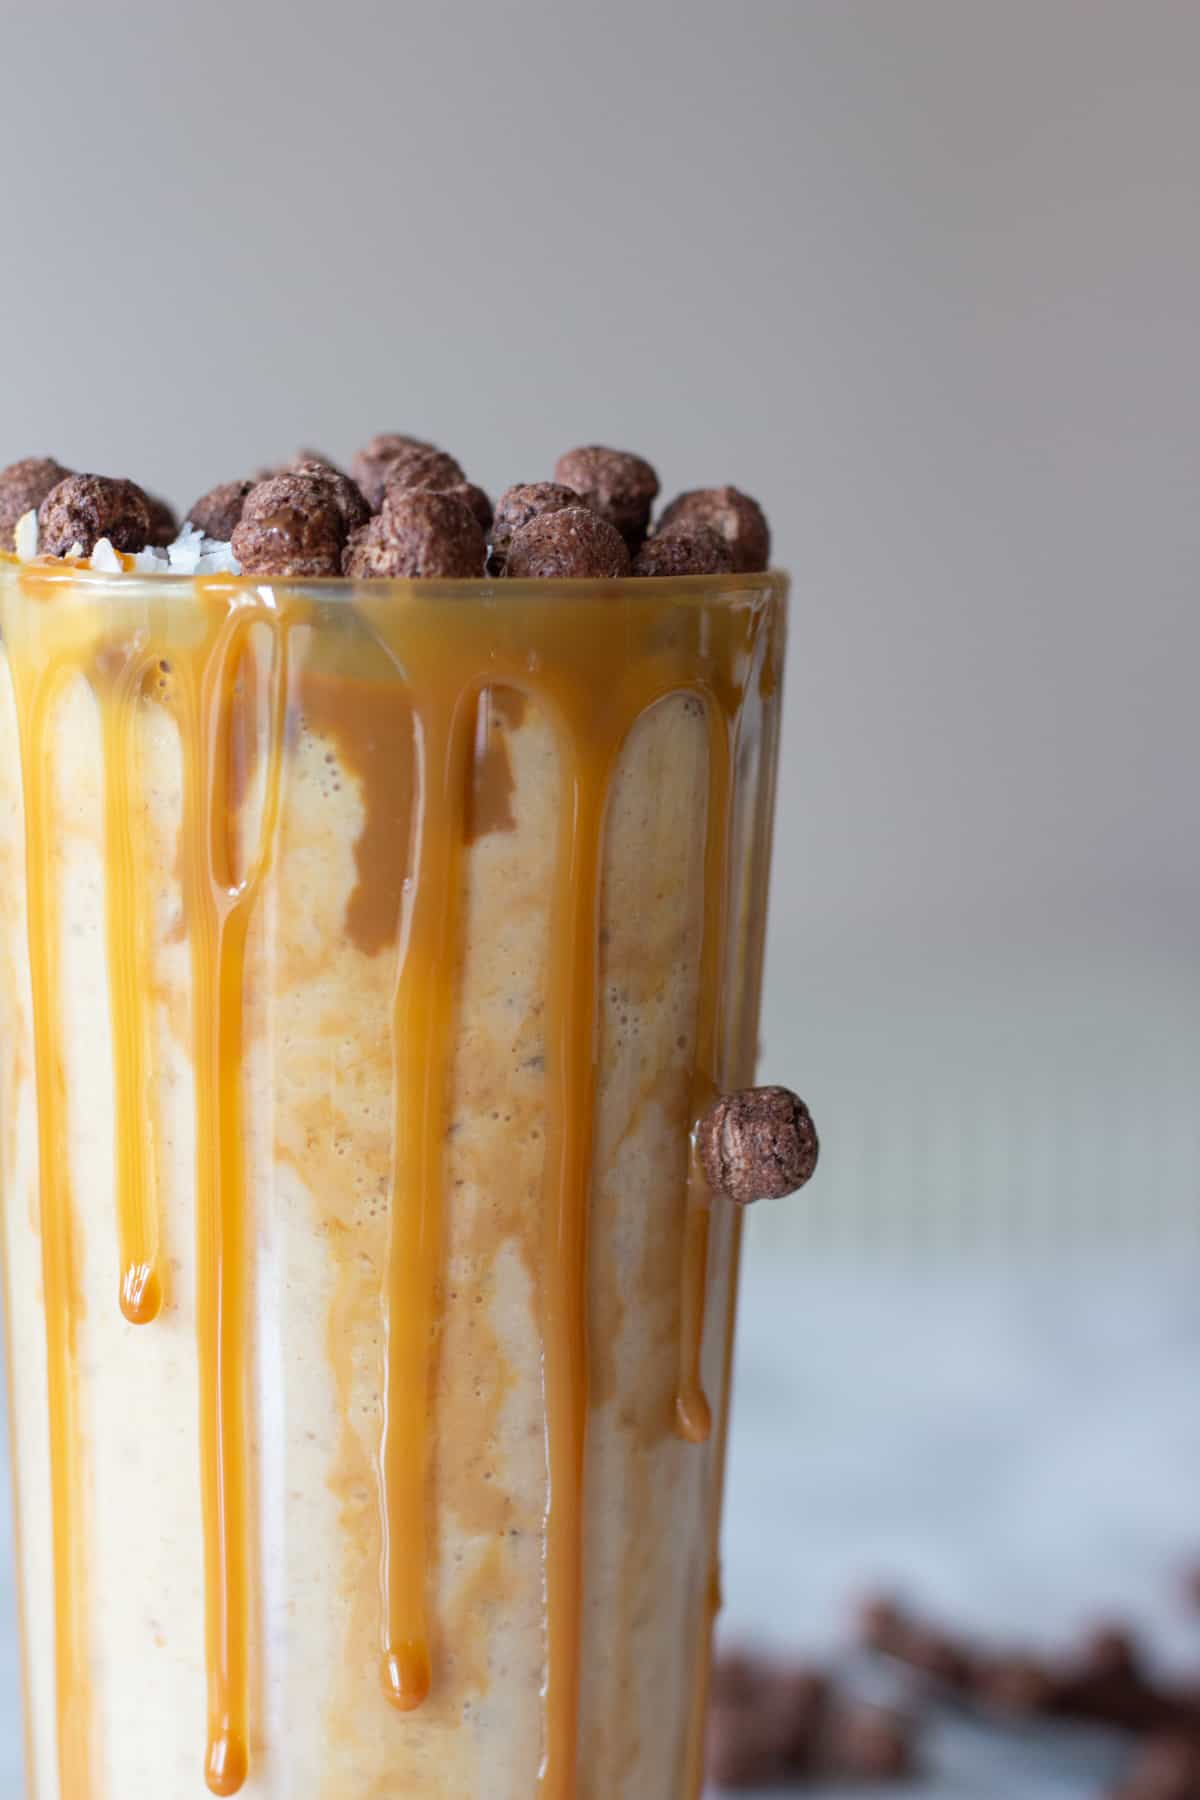 This Banana Peanut Butter Coco Puff Milkshake will make your breakfast more exciting and delicious because it has all the best flavor combinations in one tall glass! 